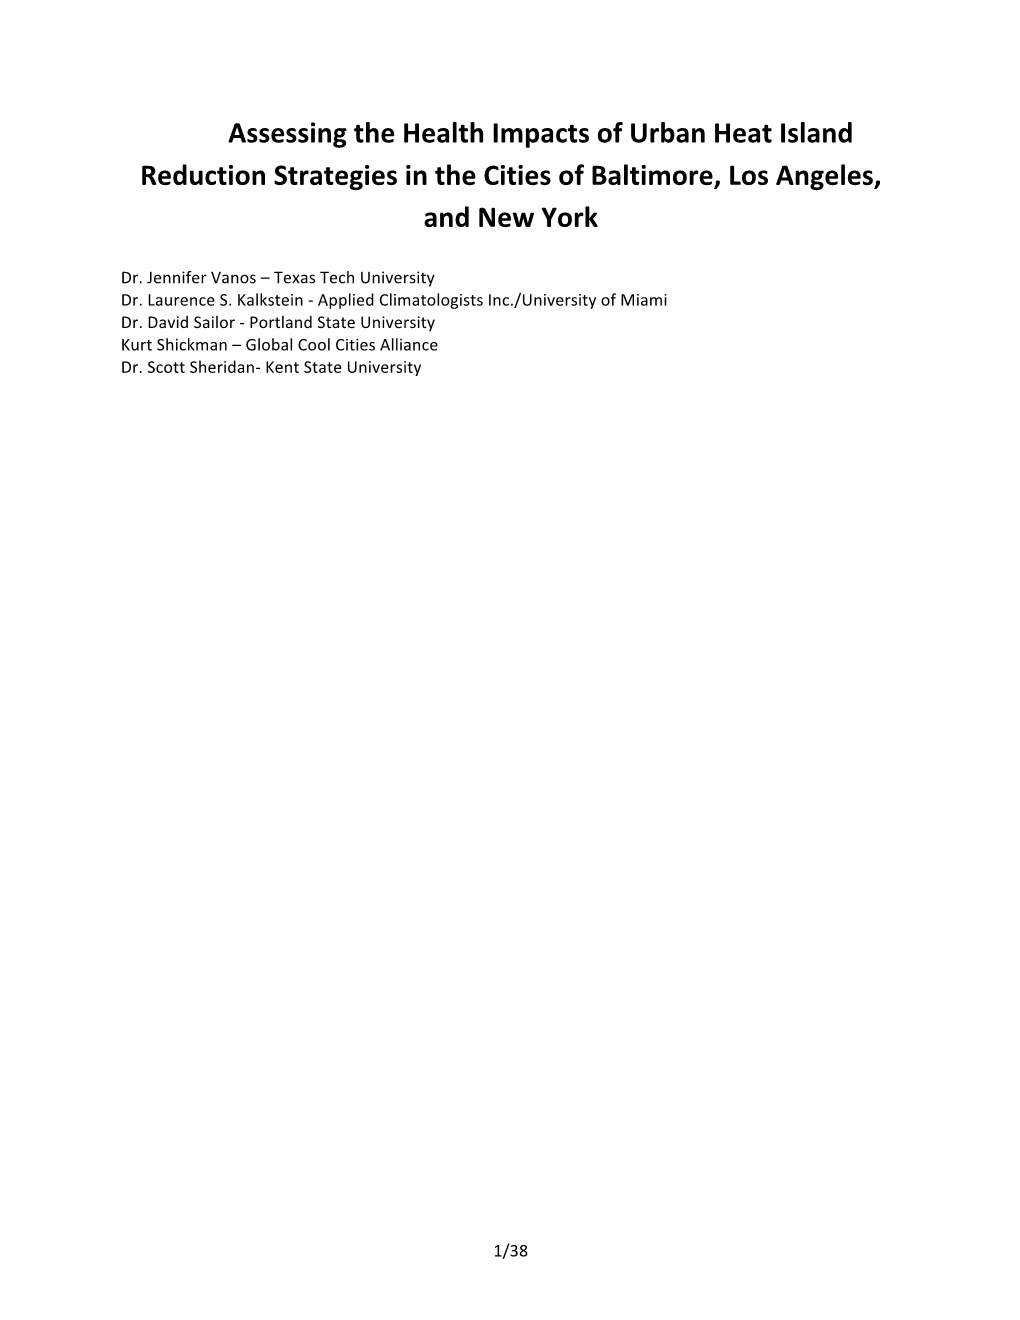 Assessing the Health Impacts of Urban Heat Island Reduction Strategies in the Cities of Baltimore, Los Angeles, and New York